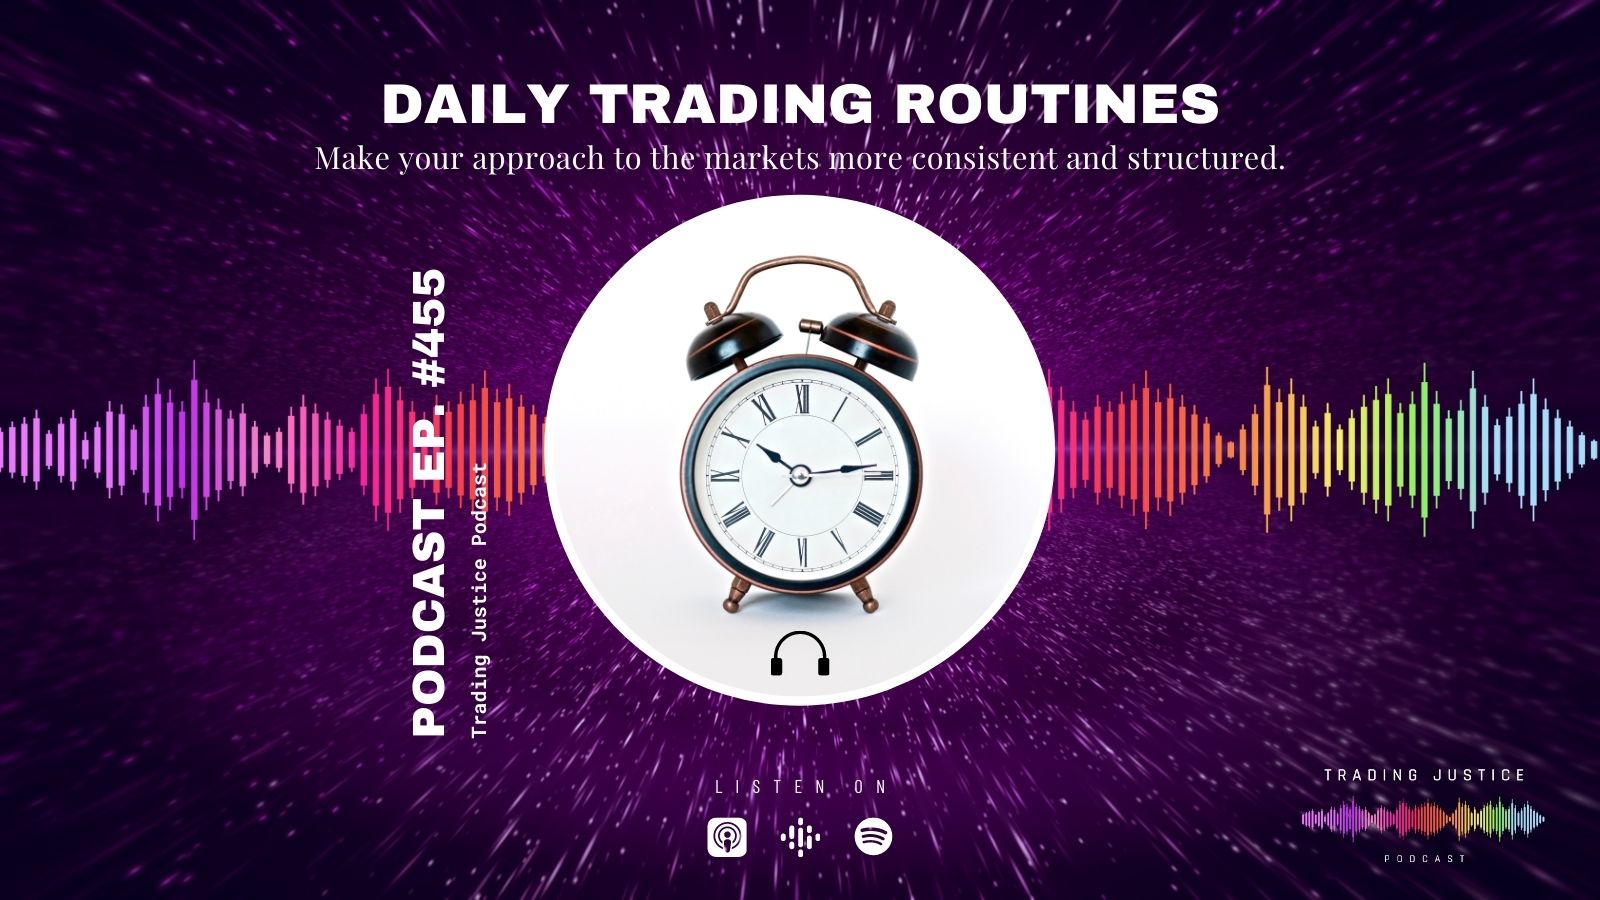 Trading Justice 455: Daily Trading Routines